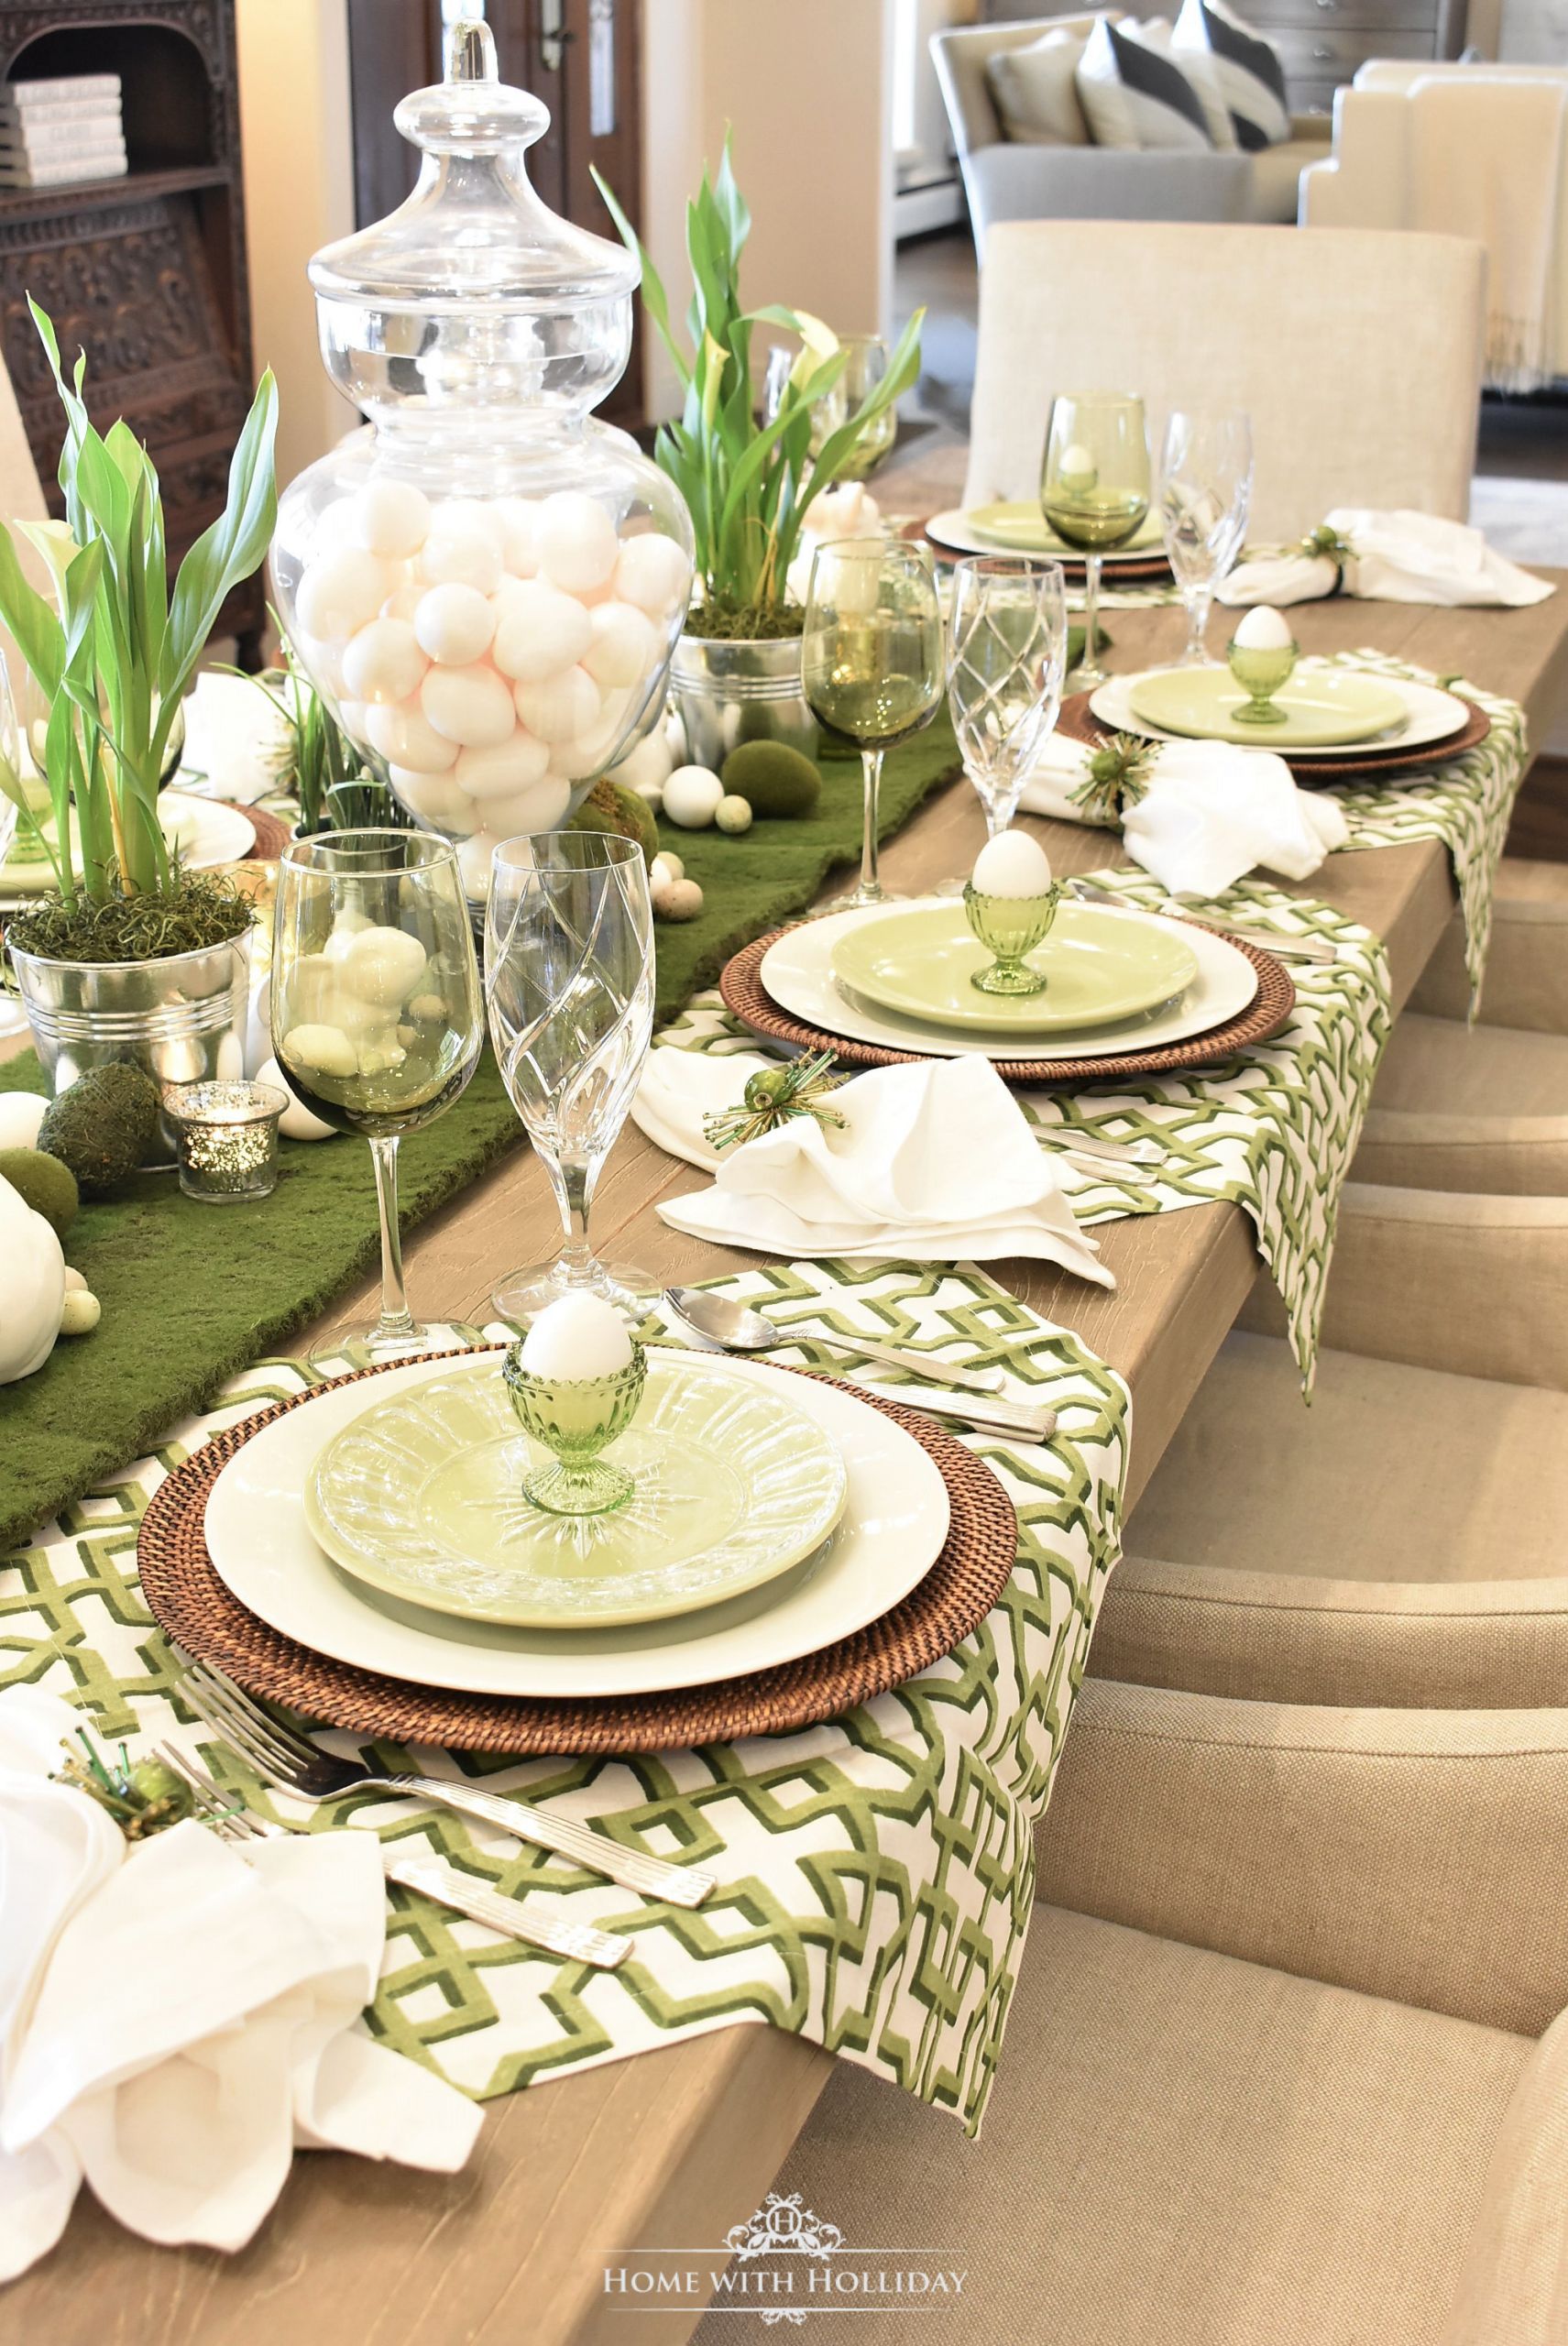 Easter Dinner Table Settings Beautiful Green and White Easter Table Setting Home with Holliday